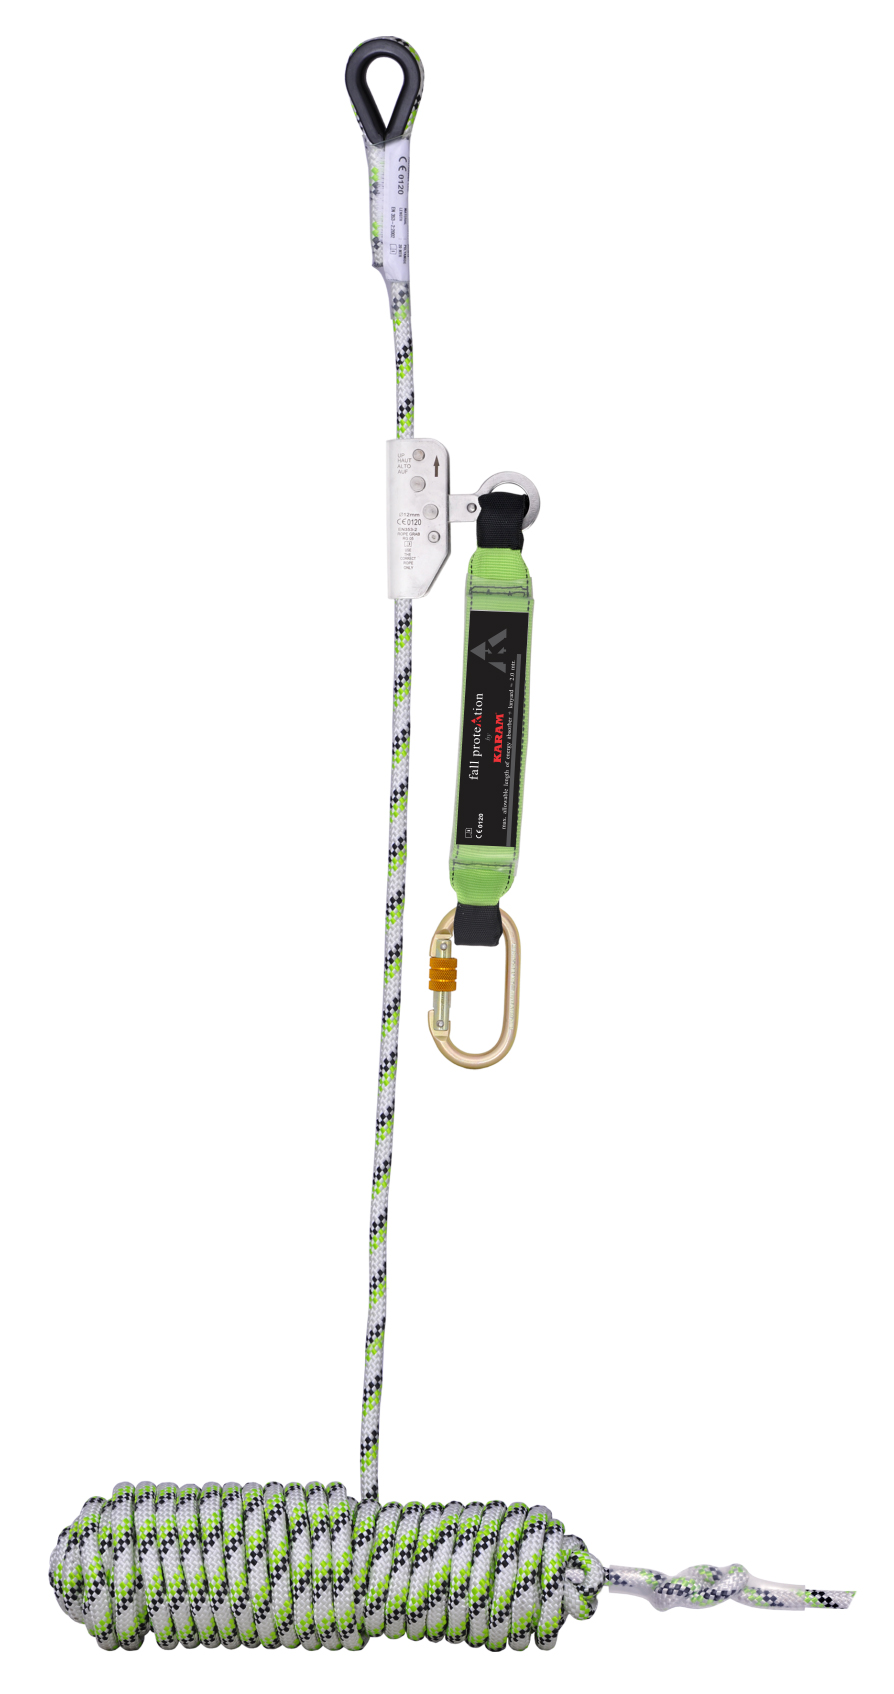 Kernmantle Rope, Fall Arrester Kernmantle for Fall Protection